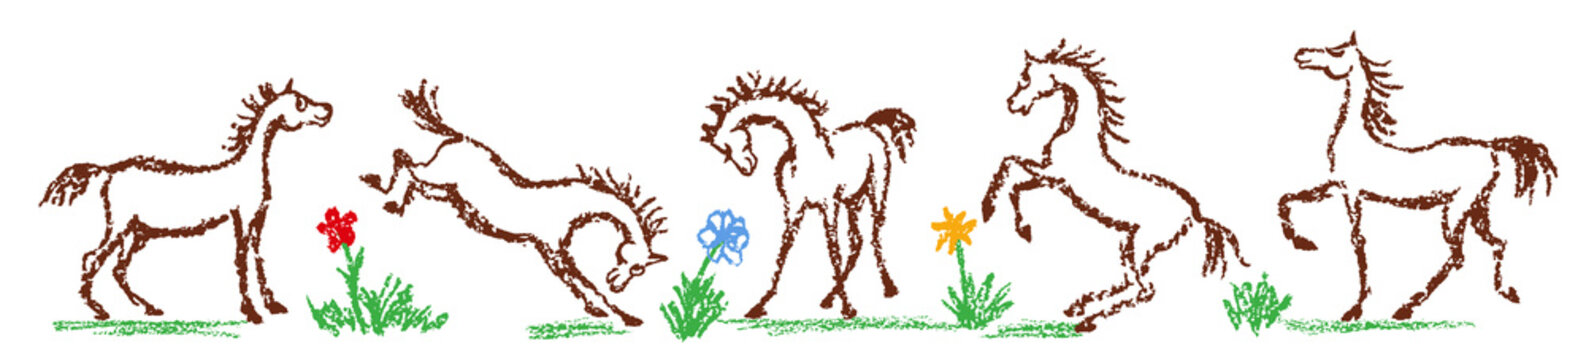 Comic funny horse set. Hand drawn crayon or pencil cartoon doodle happy character. Artistic stroke kid style. Smiling friendly pet in different poses with grass flower. Vector simple equestrian art